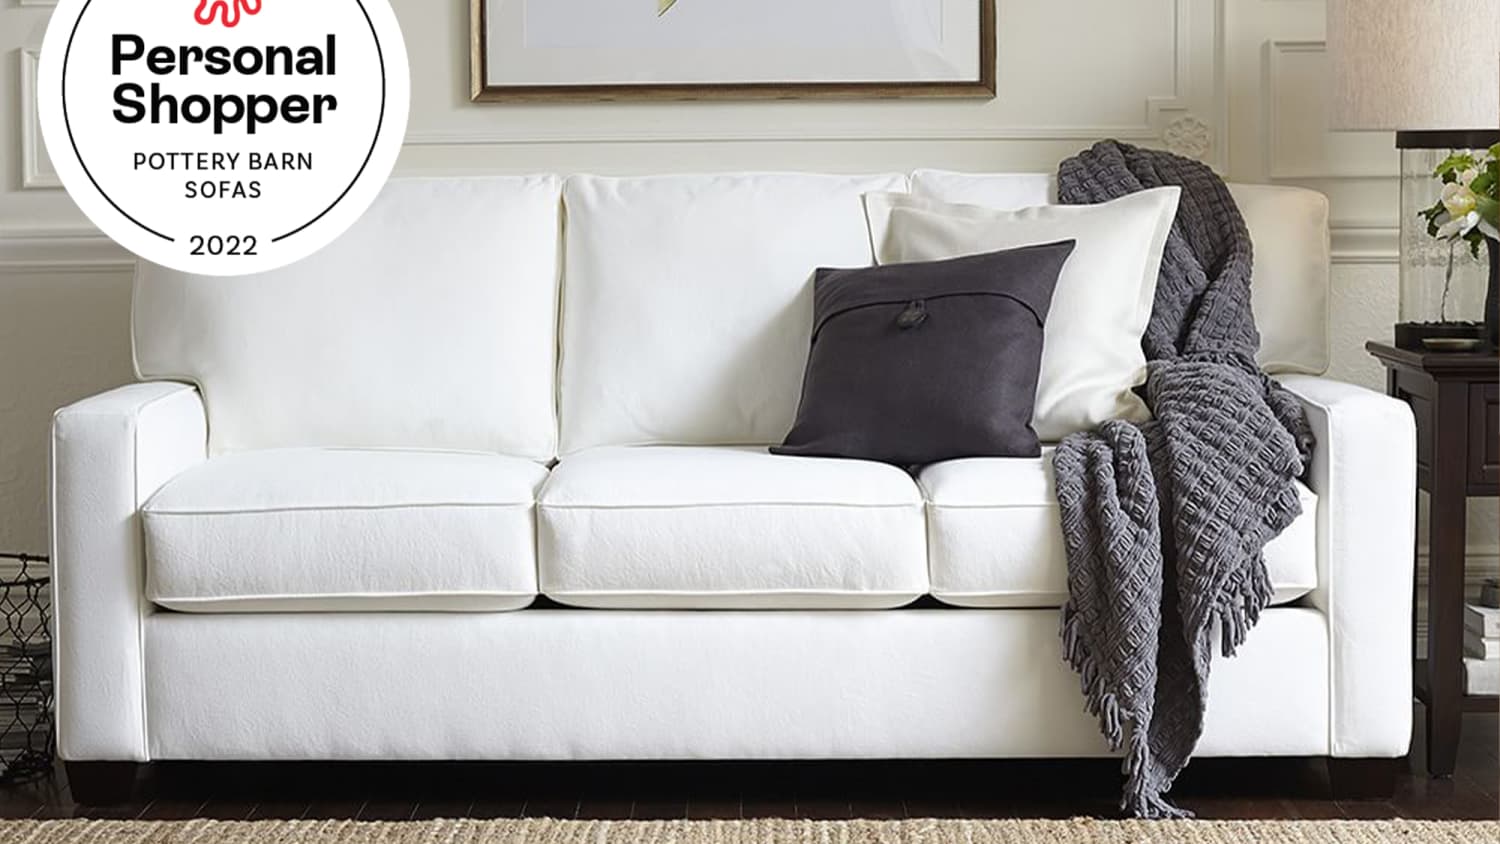 We Tested (and Rated!) All Pottery Barn Sofas and Sectionals for